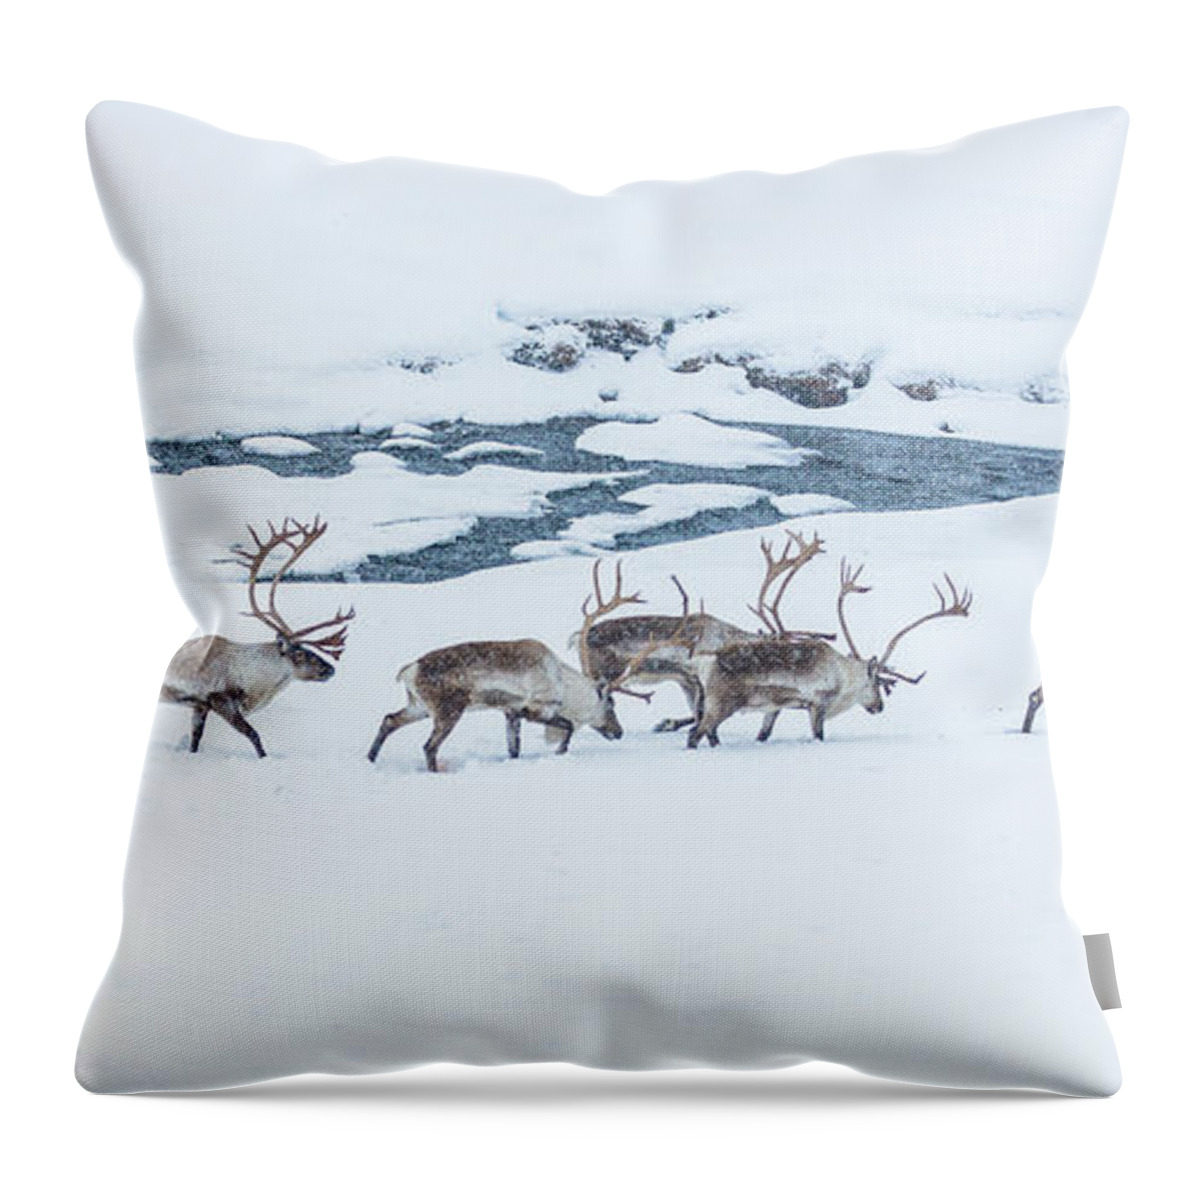 Panoramic Throw Pillow featuring the photograph Reindeer by Jaturong Kengwinit